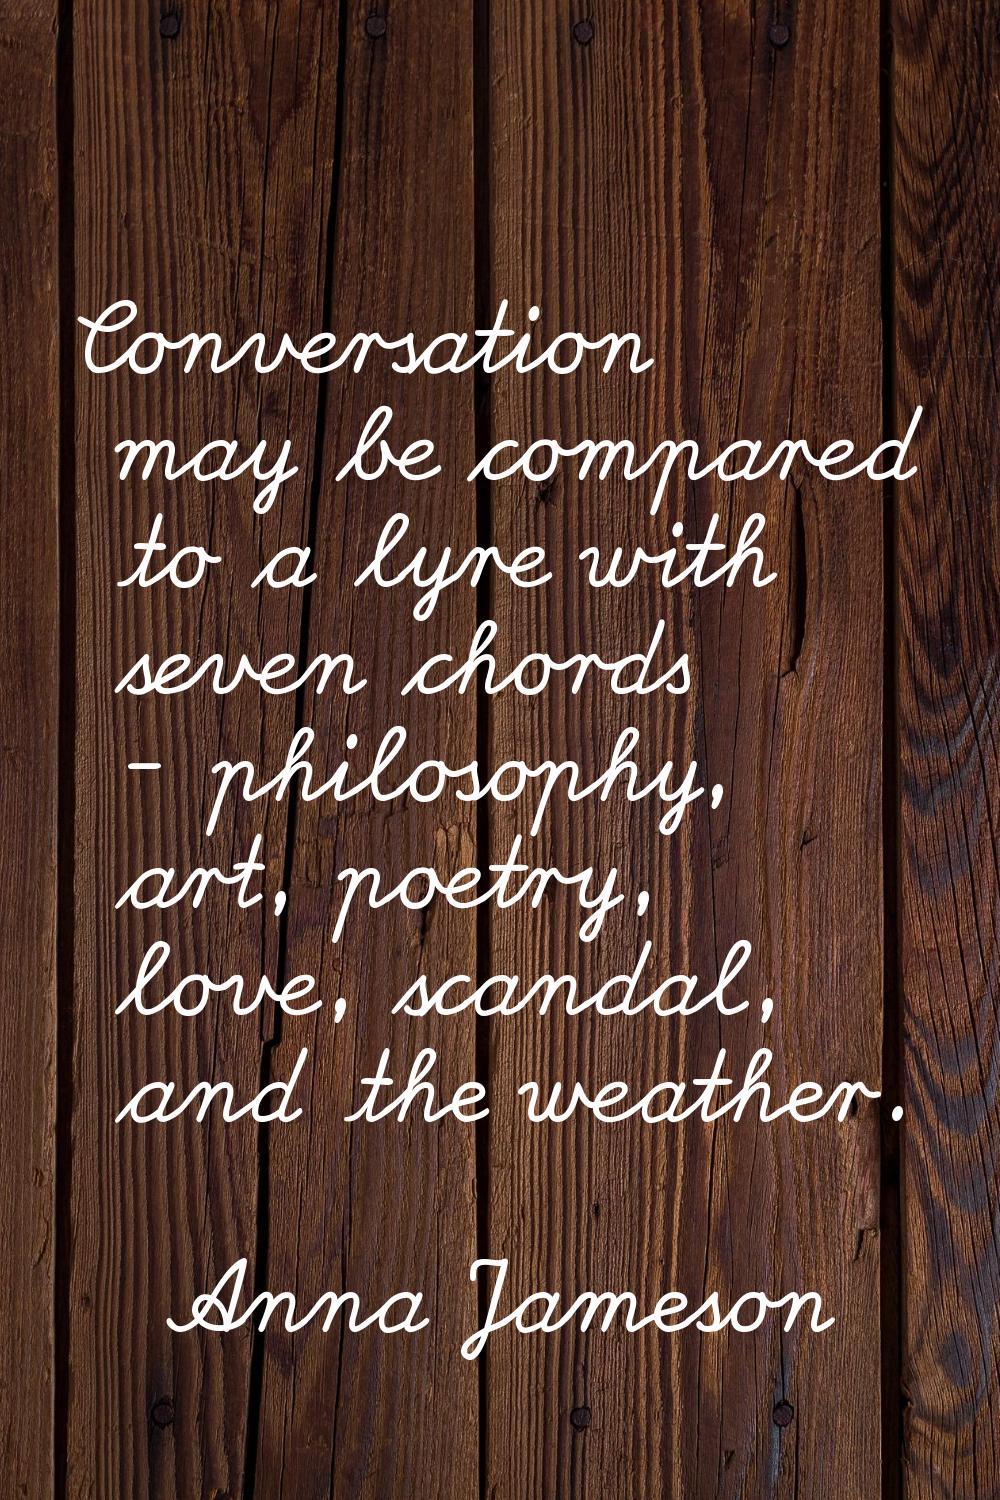 Conversation may be compared to a lyre with seven chords - philosophy, art, poetry, love, scandal, 